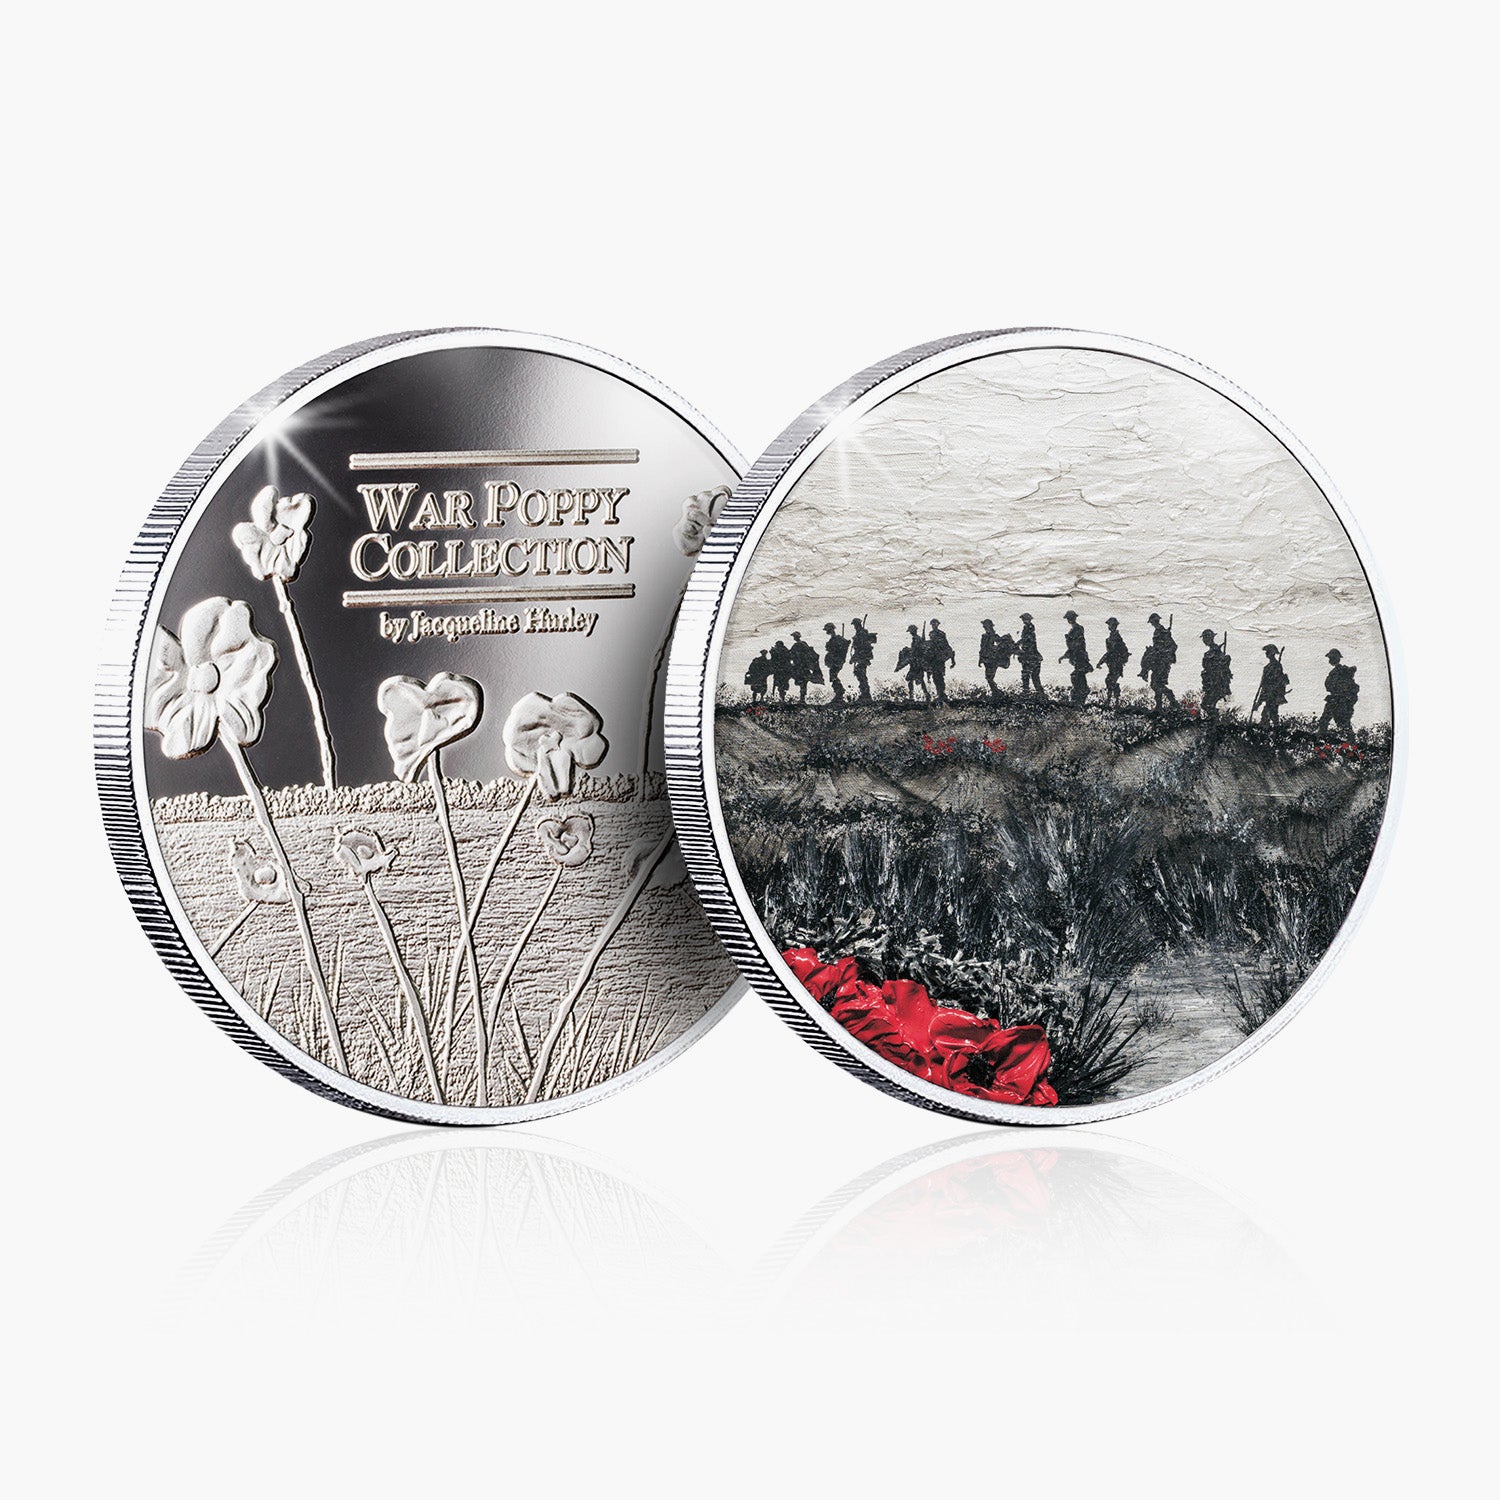 Where The Tommies Go, Silver-Plated Commemorative